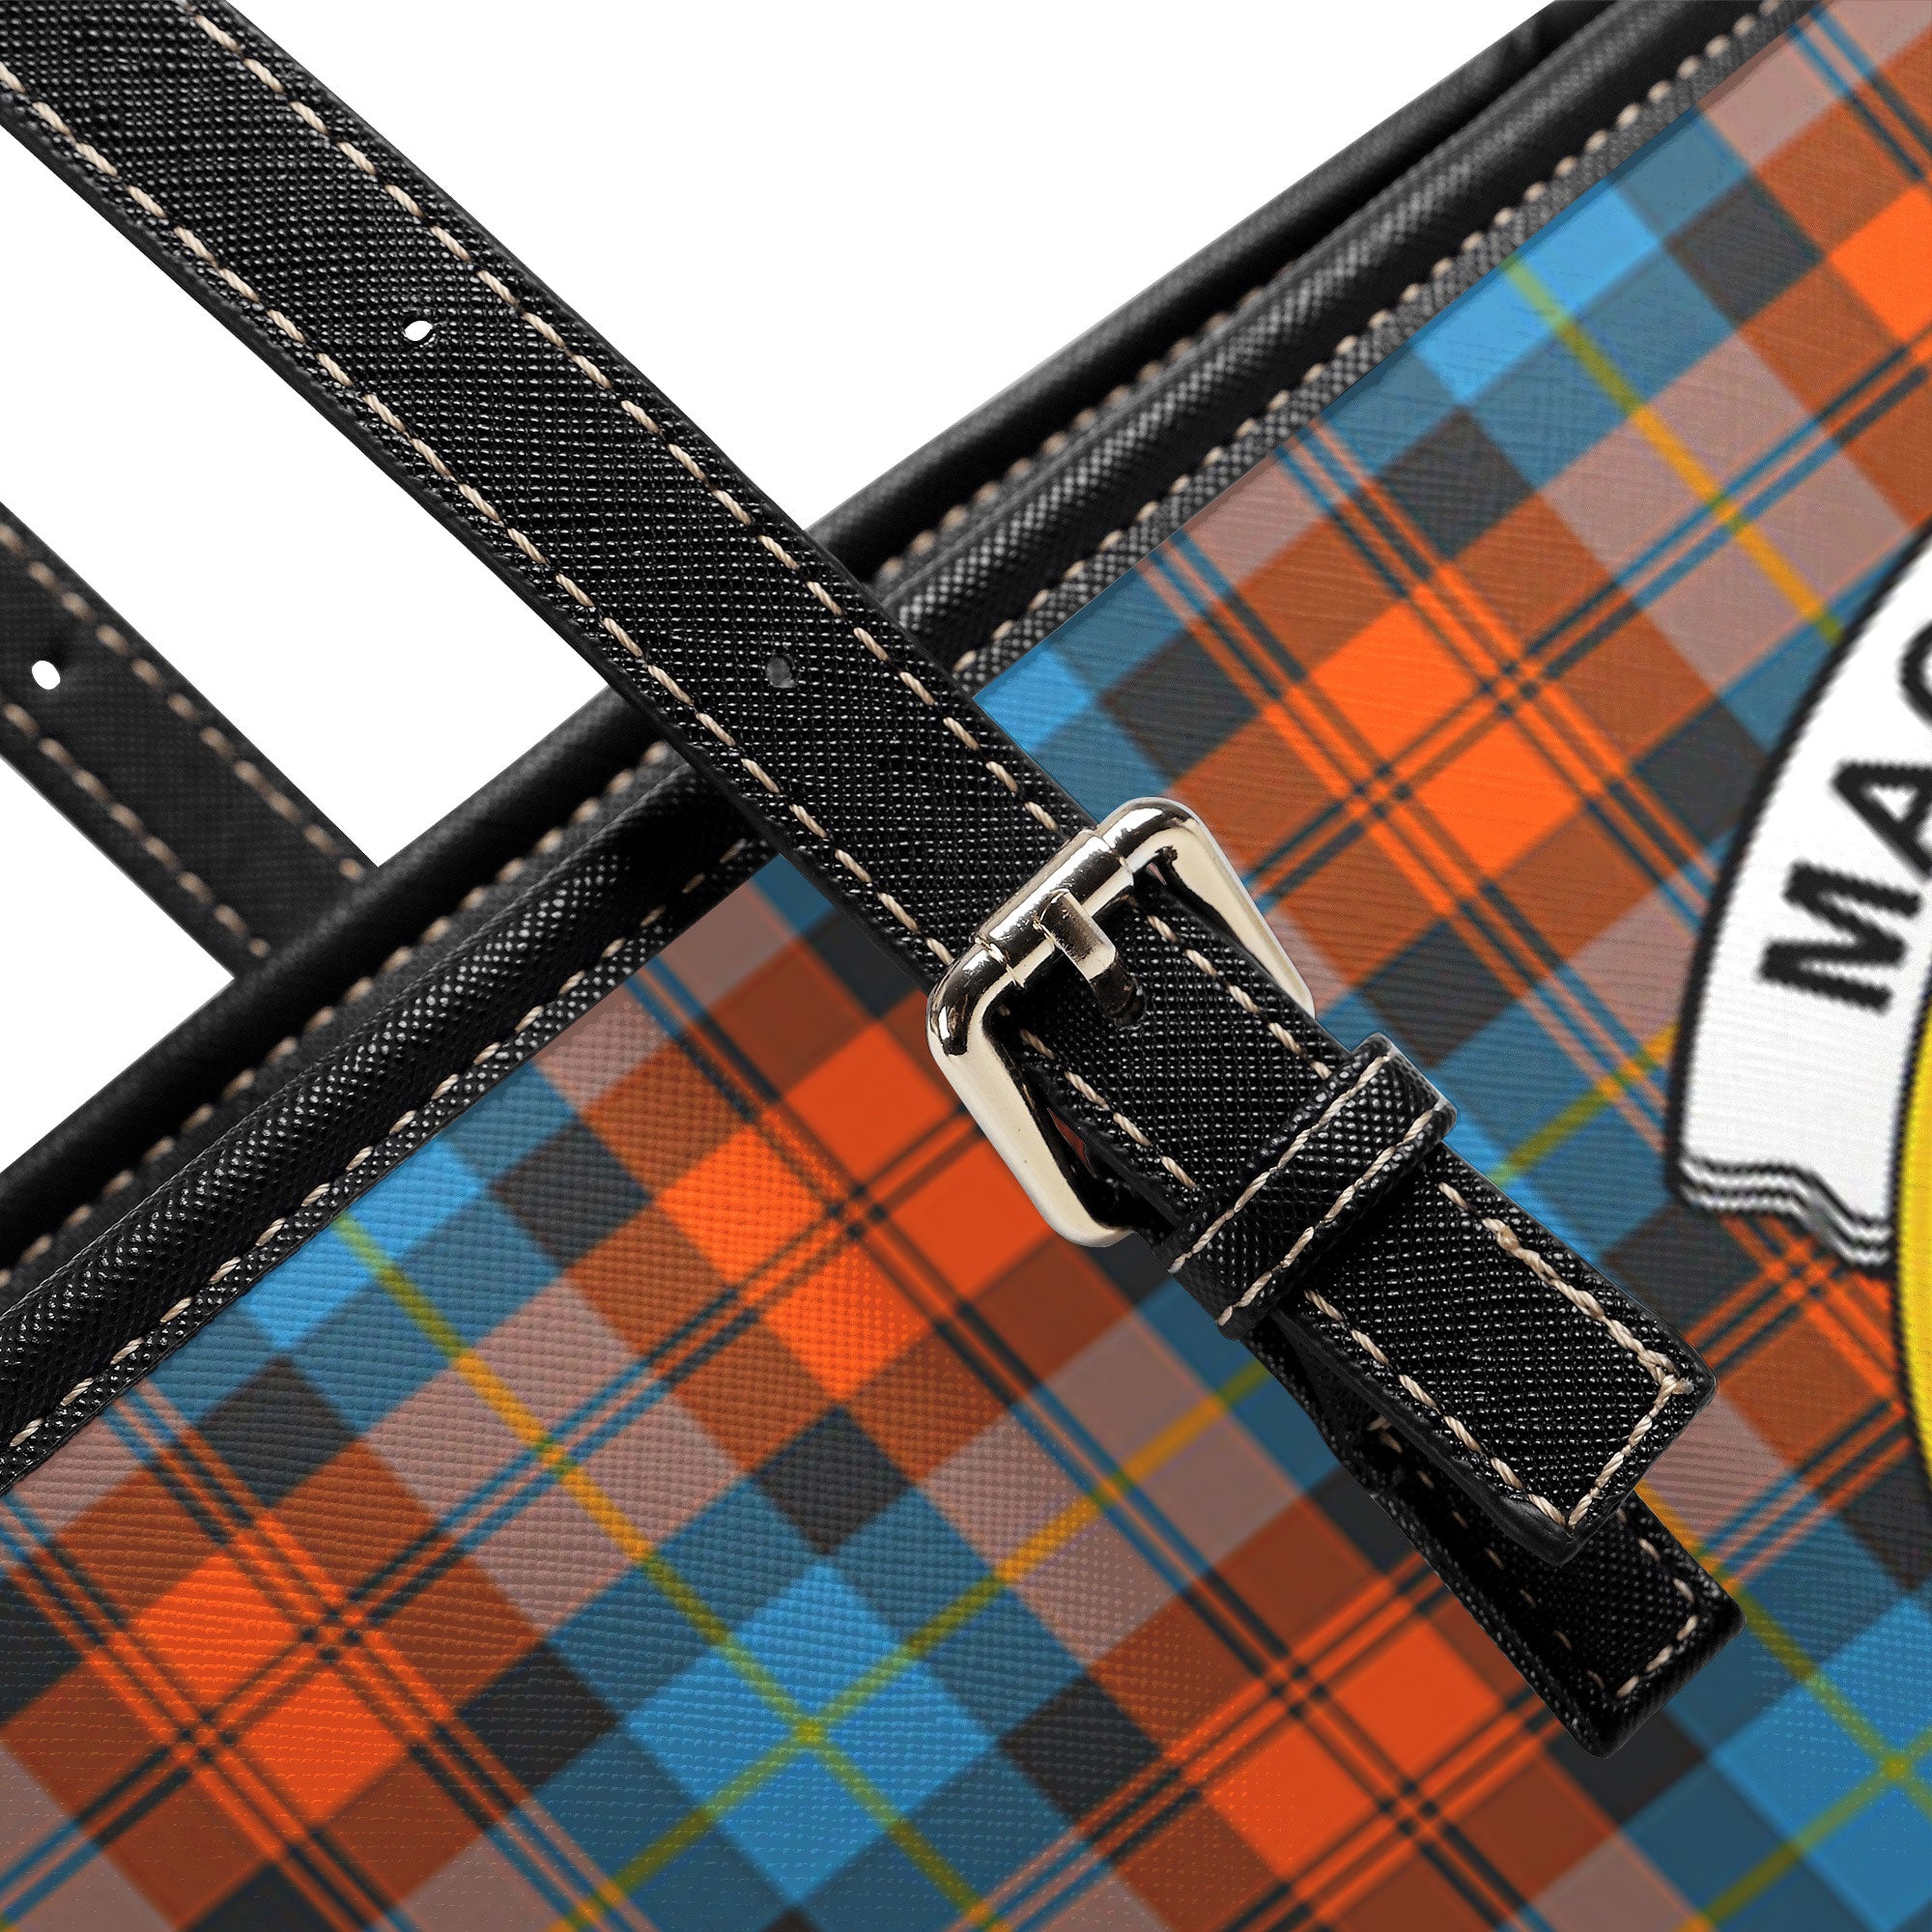 MacLachlan Ancient Tartan Crest Leather Tote Bag